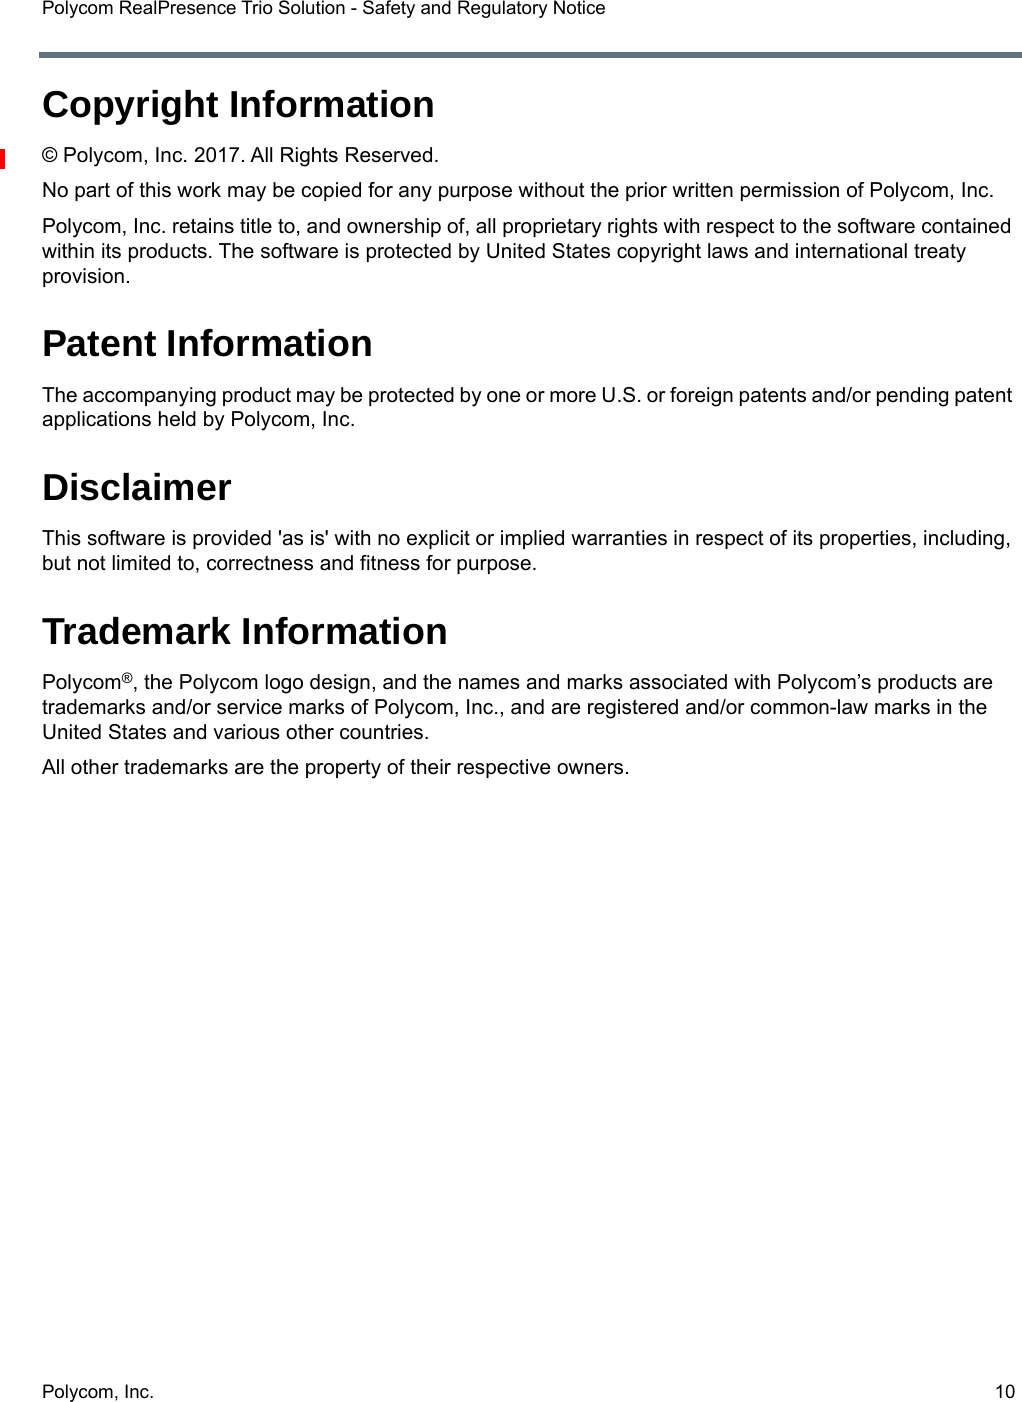 Polycom, Inc.  10Polycom RealPresence Trio Solution - Safety and Regulatory NoticeCopyright Information© Polycom, Inc. 2017. All Rights Reserved.No part of this work may be copied for any purpose without the prior written permission of Polycom, Inc.Polycom, Inc. retains title to, and ownership of, all proprietary rights with respect to the software contained within its products. The software is protected by United States copyright laws and international treaty provision.Patent InformationThe accompanying product may be protected by one or more U.S. or foreign patents and/or pending patent applications held by Polycom, Inc.DisclaimerThis software is provided &apos;as is&apos; with no explicit or implied warranties in respect of its properties, including, but not limited to, correctness and fitness for purpose.Trademark InformationPolycom®, the Polycom logo design, and the names and marks associated with Polycom’s products are trademarks and/or service marks of Polycom, Inc., and are registered and/or common-law marks in the United States and various other countries.All other trademarks are the property of their respective owners.